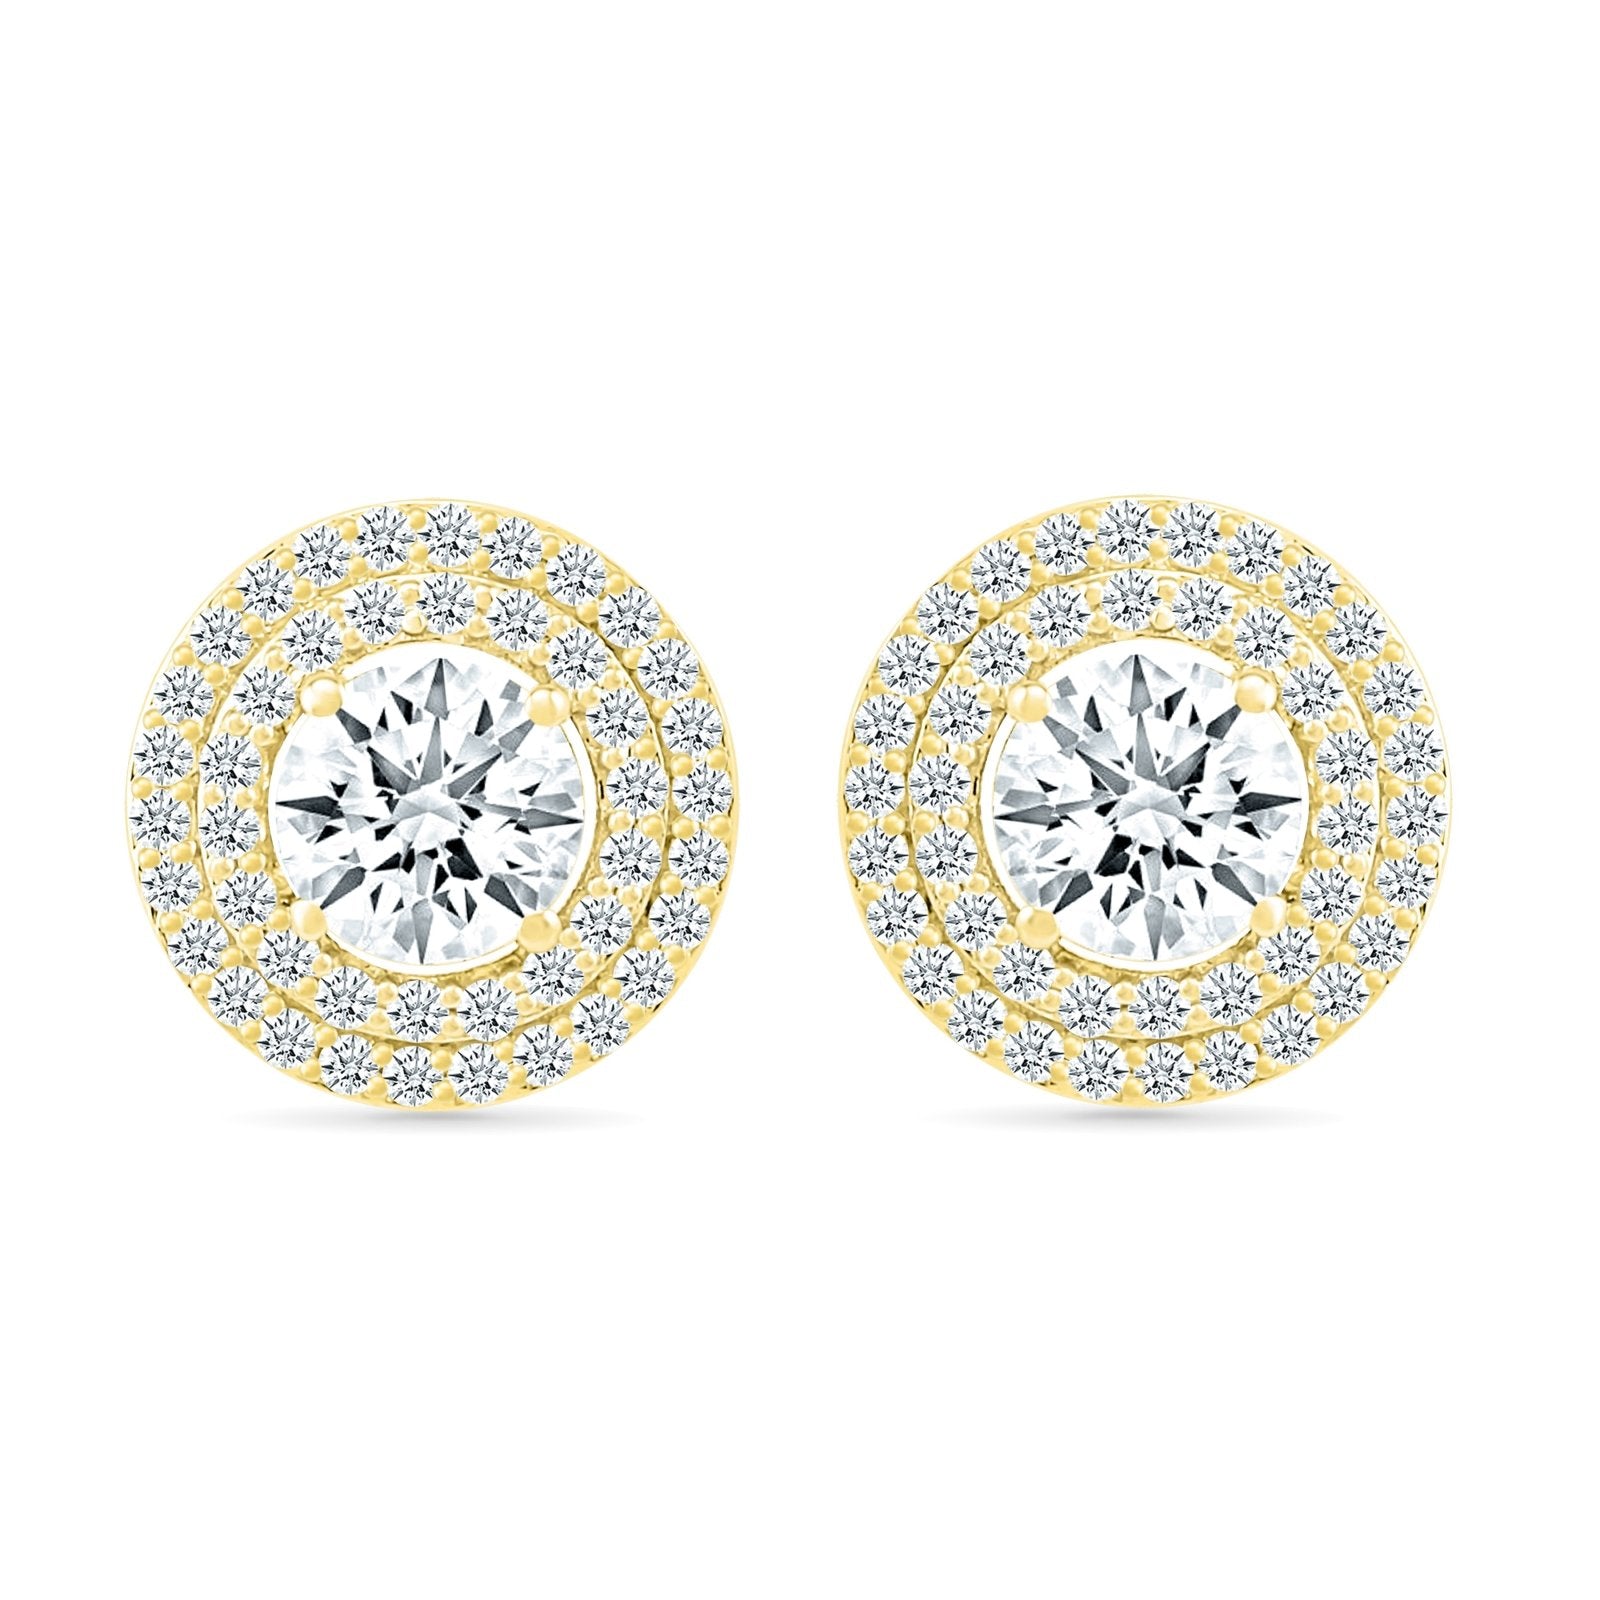 Round White Sapphire Studs with Double Halo Earrings Estella Collection #product_description# 32655 Made to Order New Arrivals Traditional Stud #tag4# #tag5# #tag6# #tag7# #tag8# #tag9# #tag10#